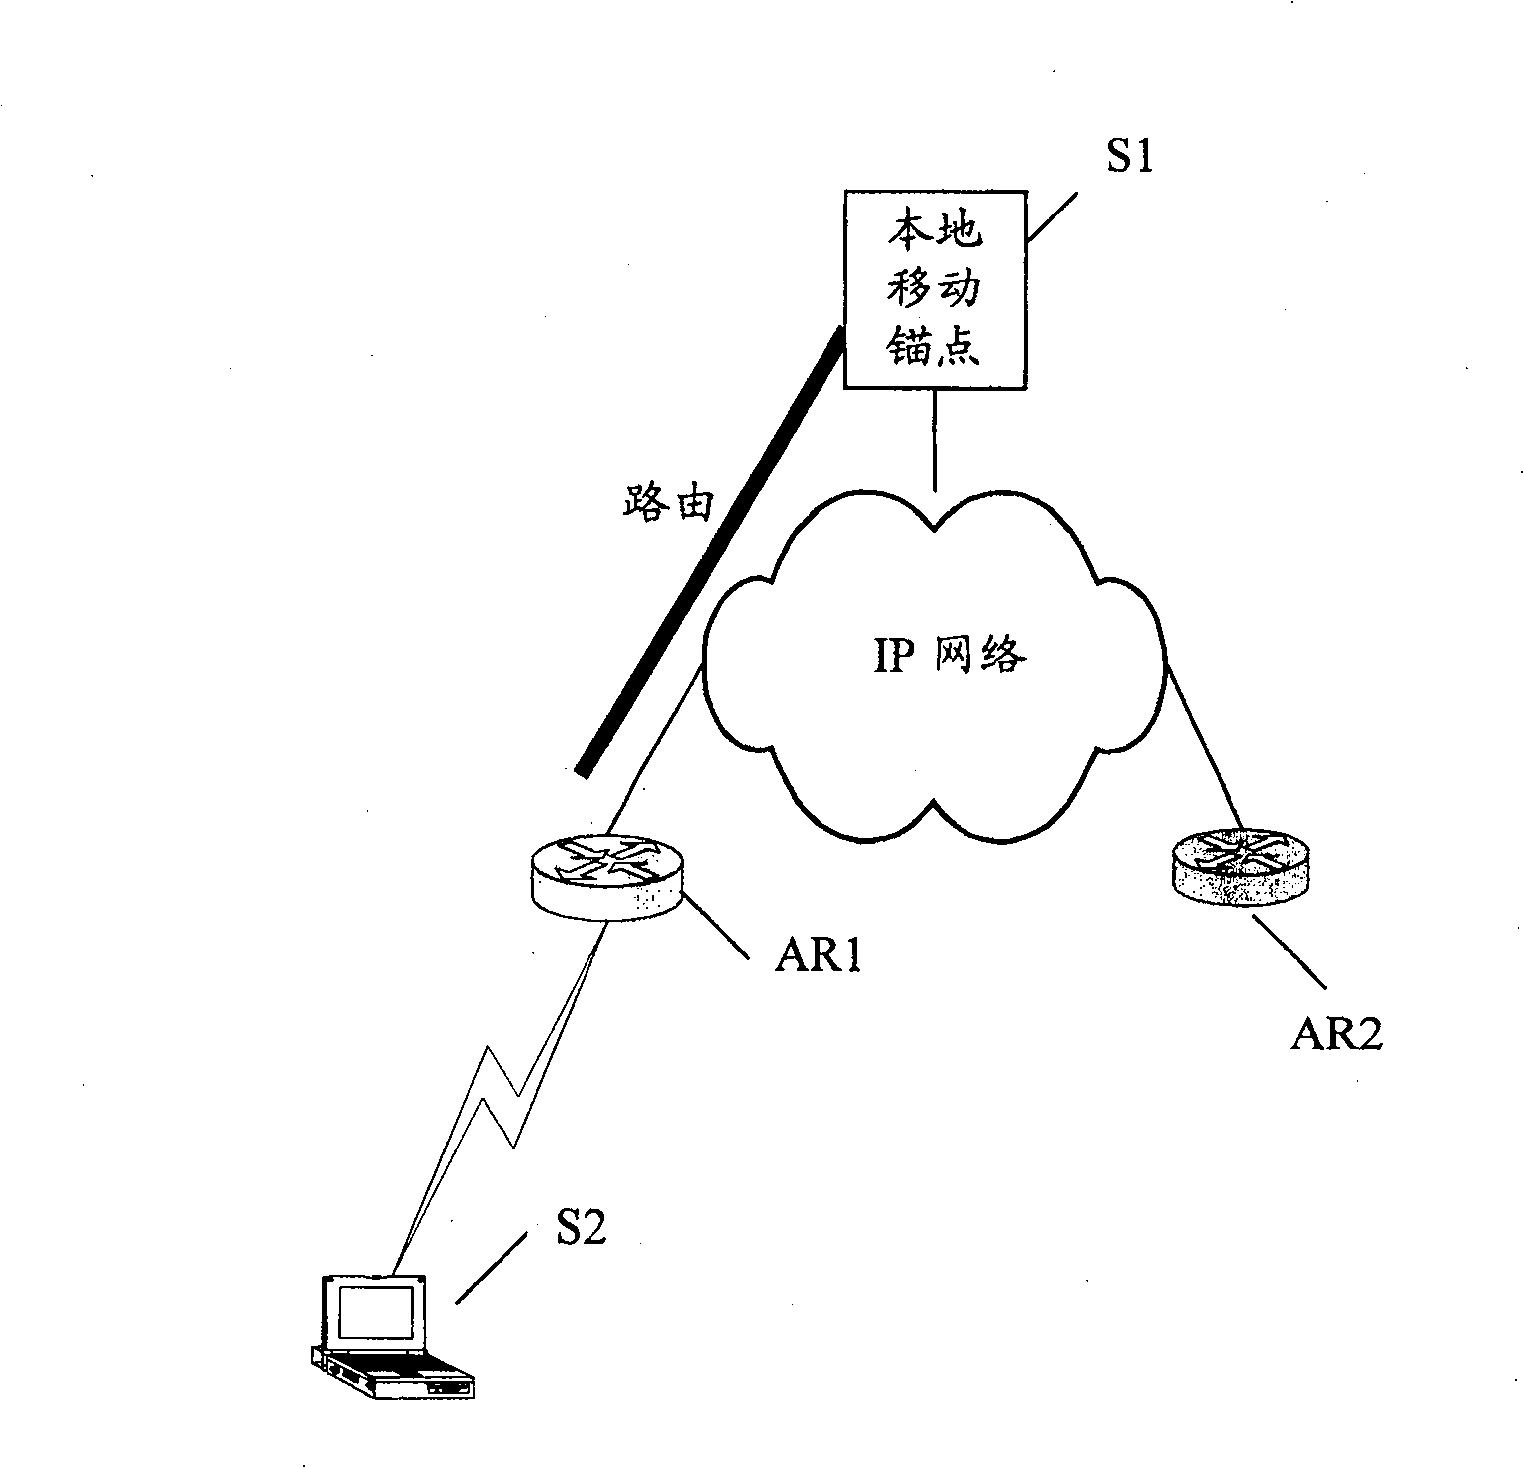 Local mobile management system and method based on network